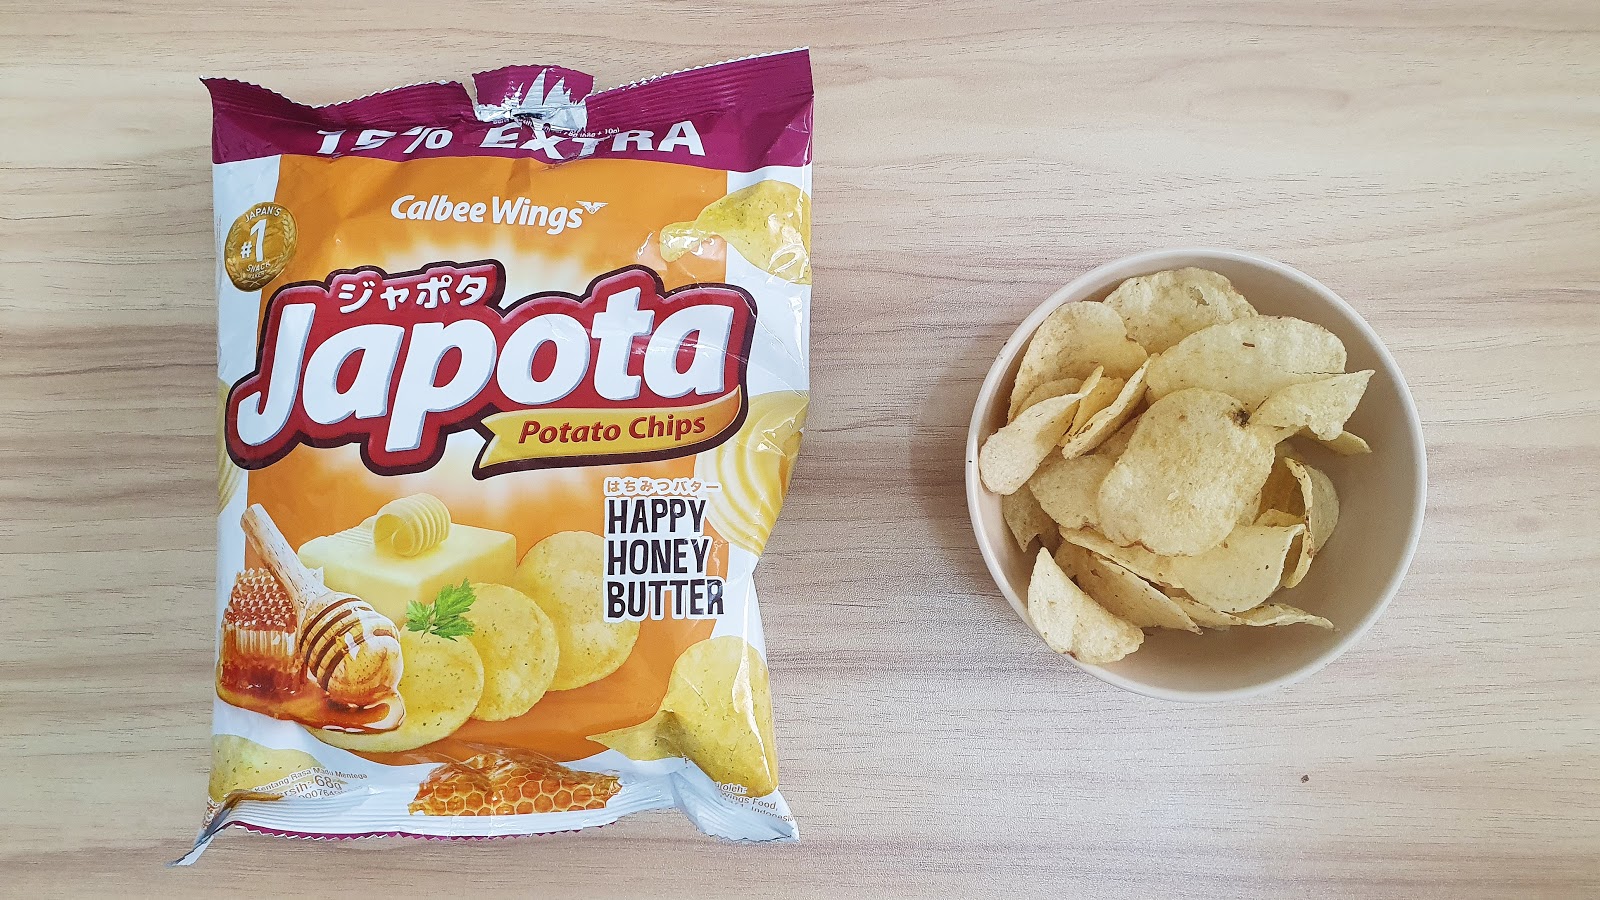 Top 8 Best And Worst Potato Chips From Indonesia - Spicy Sharon - A